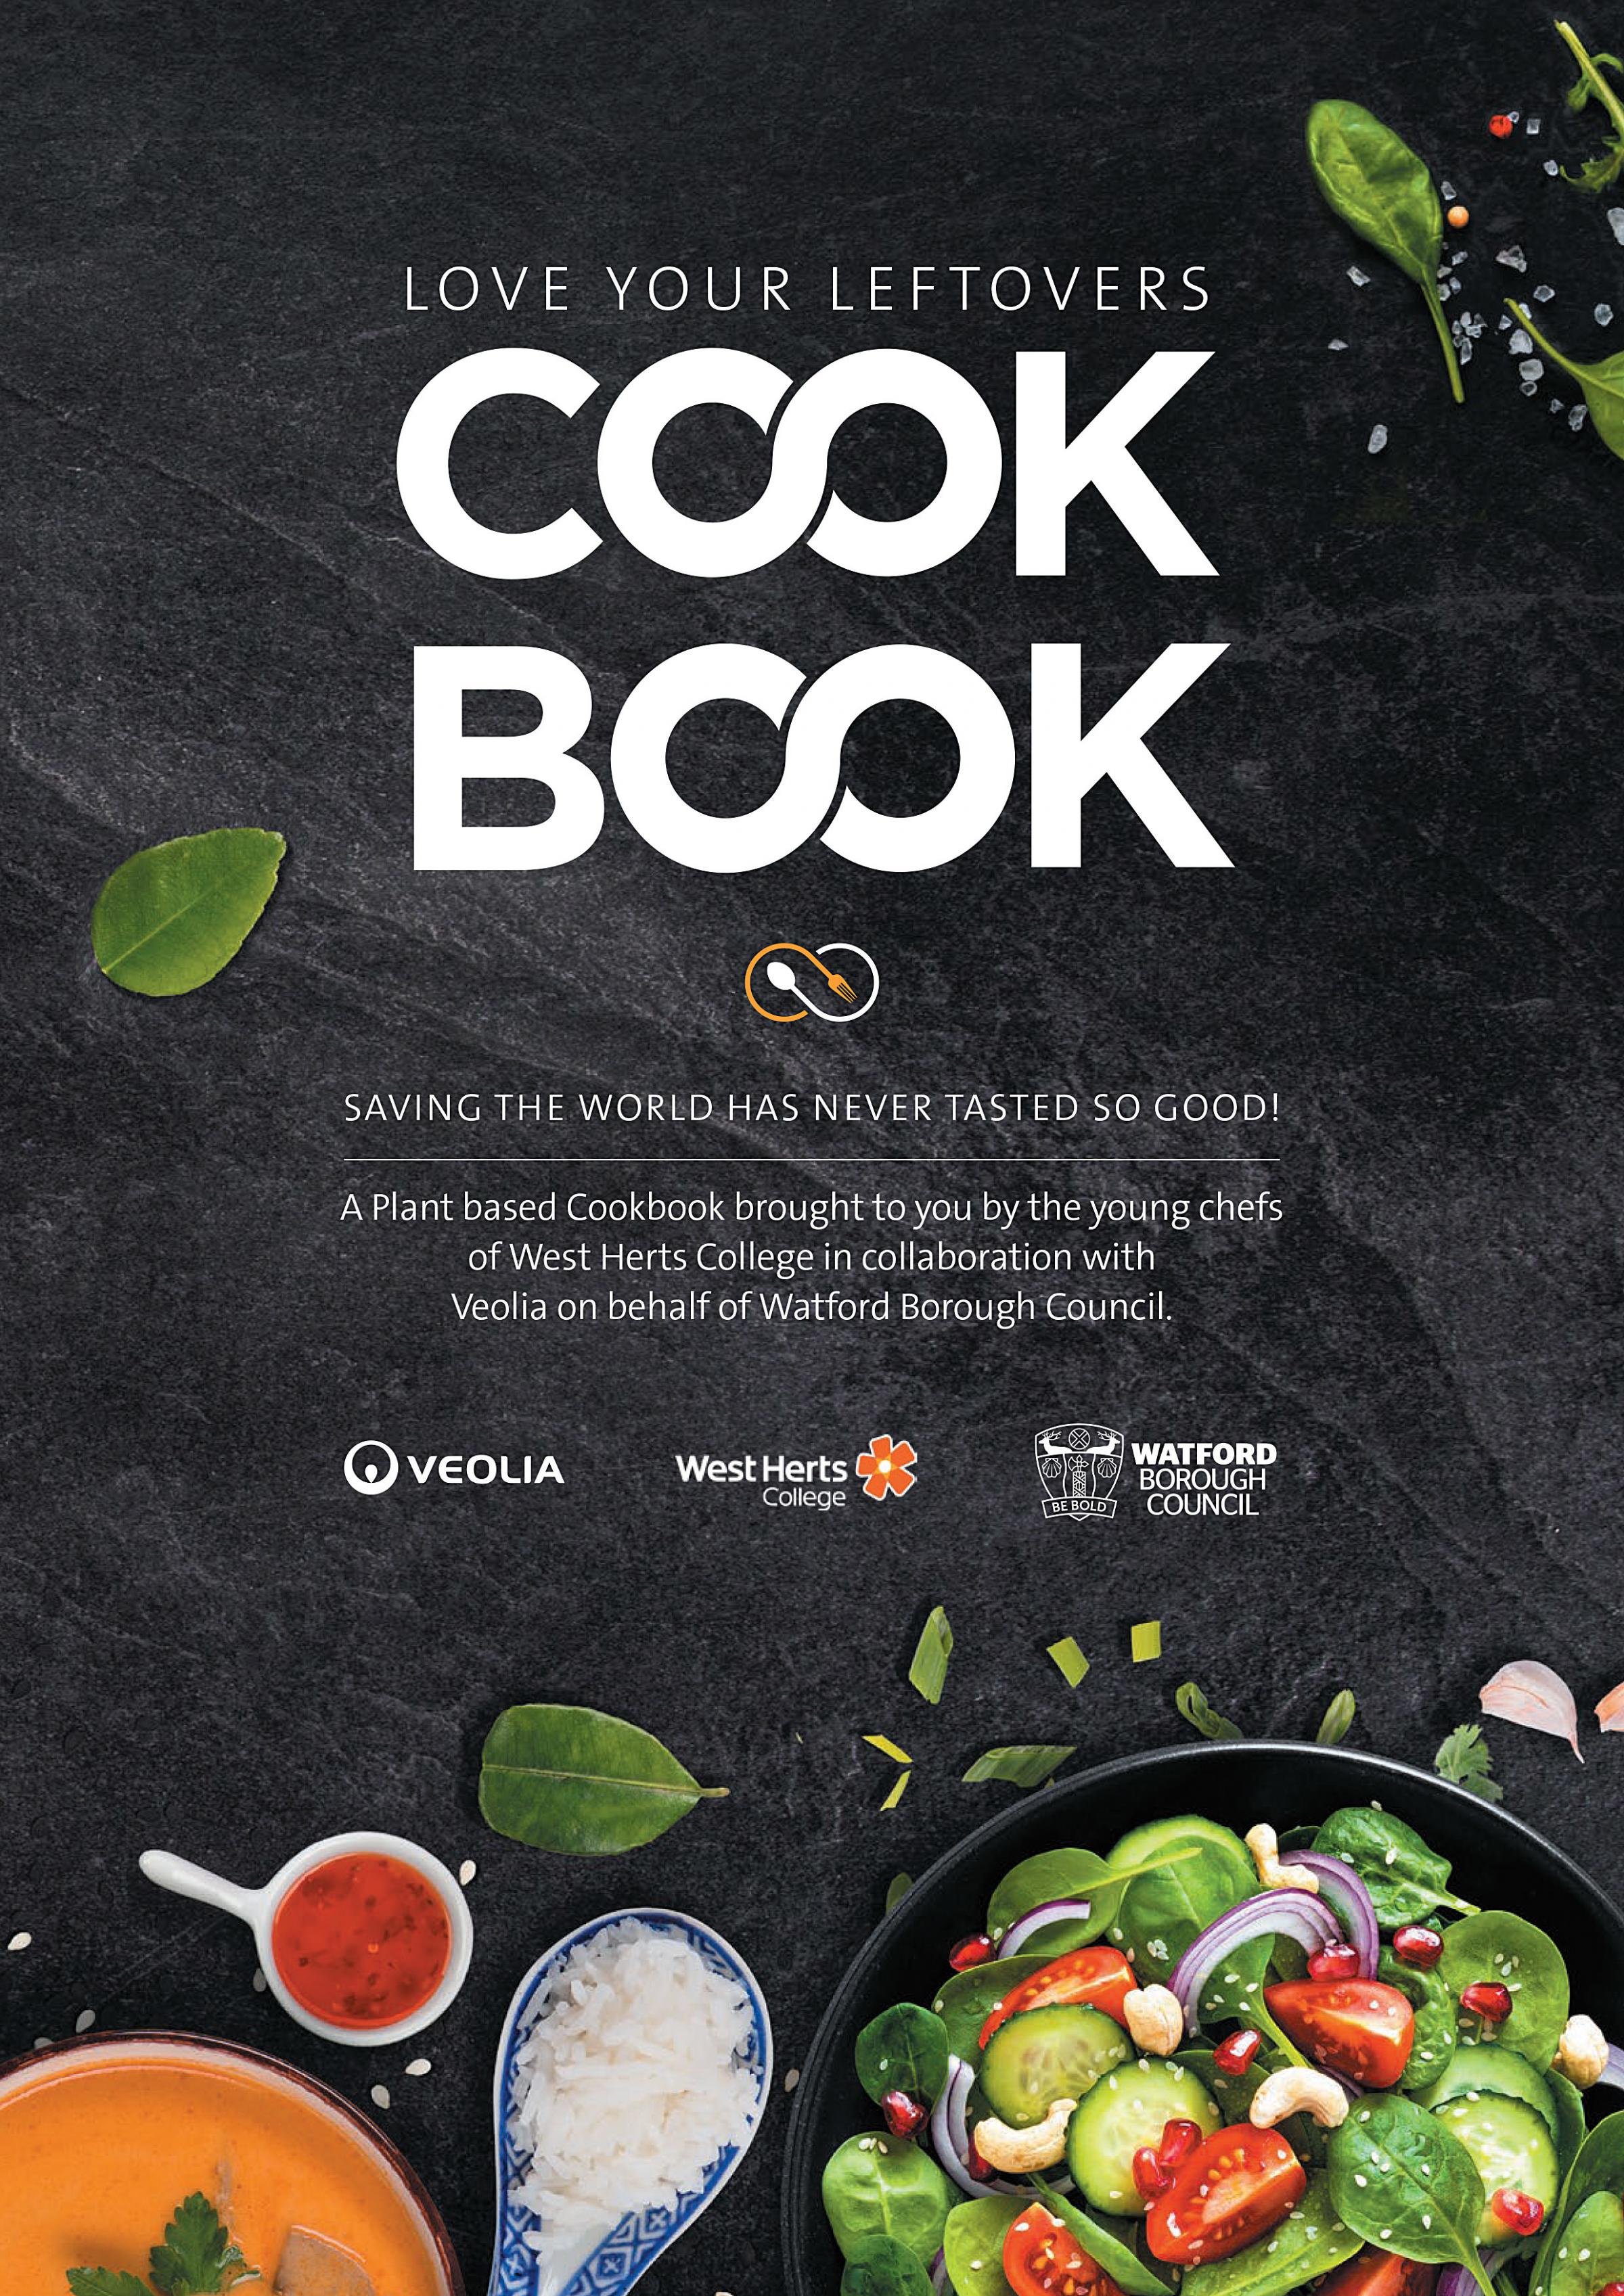 The cook book produced by West Herts College students